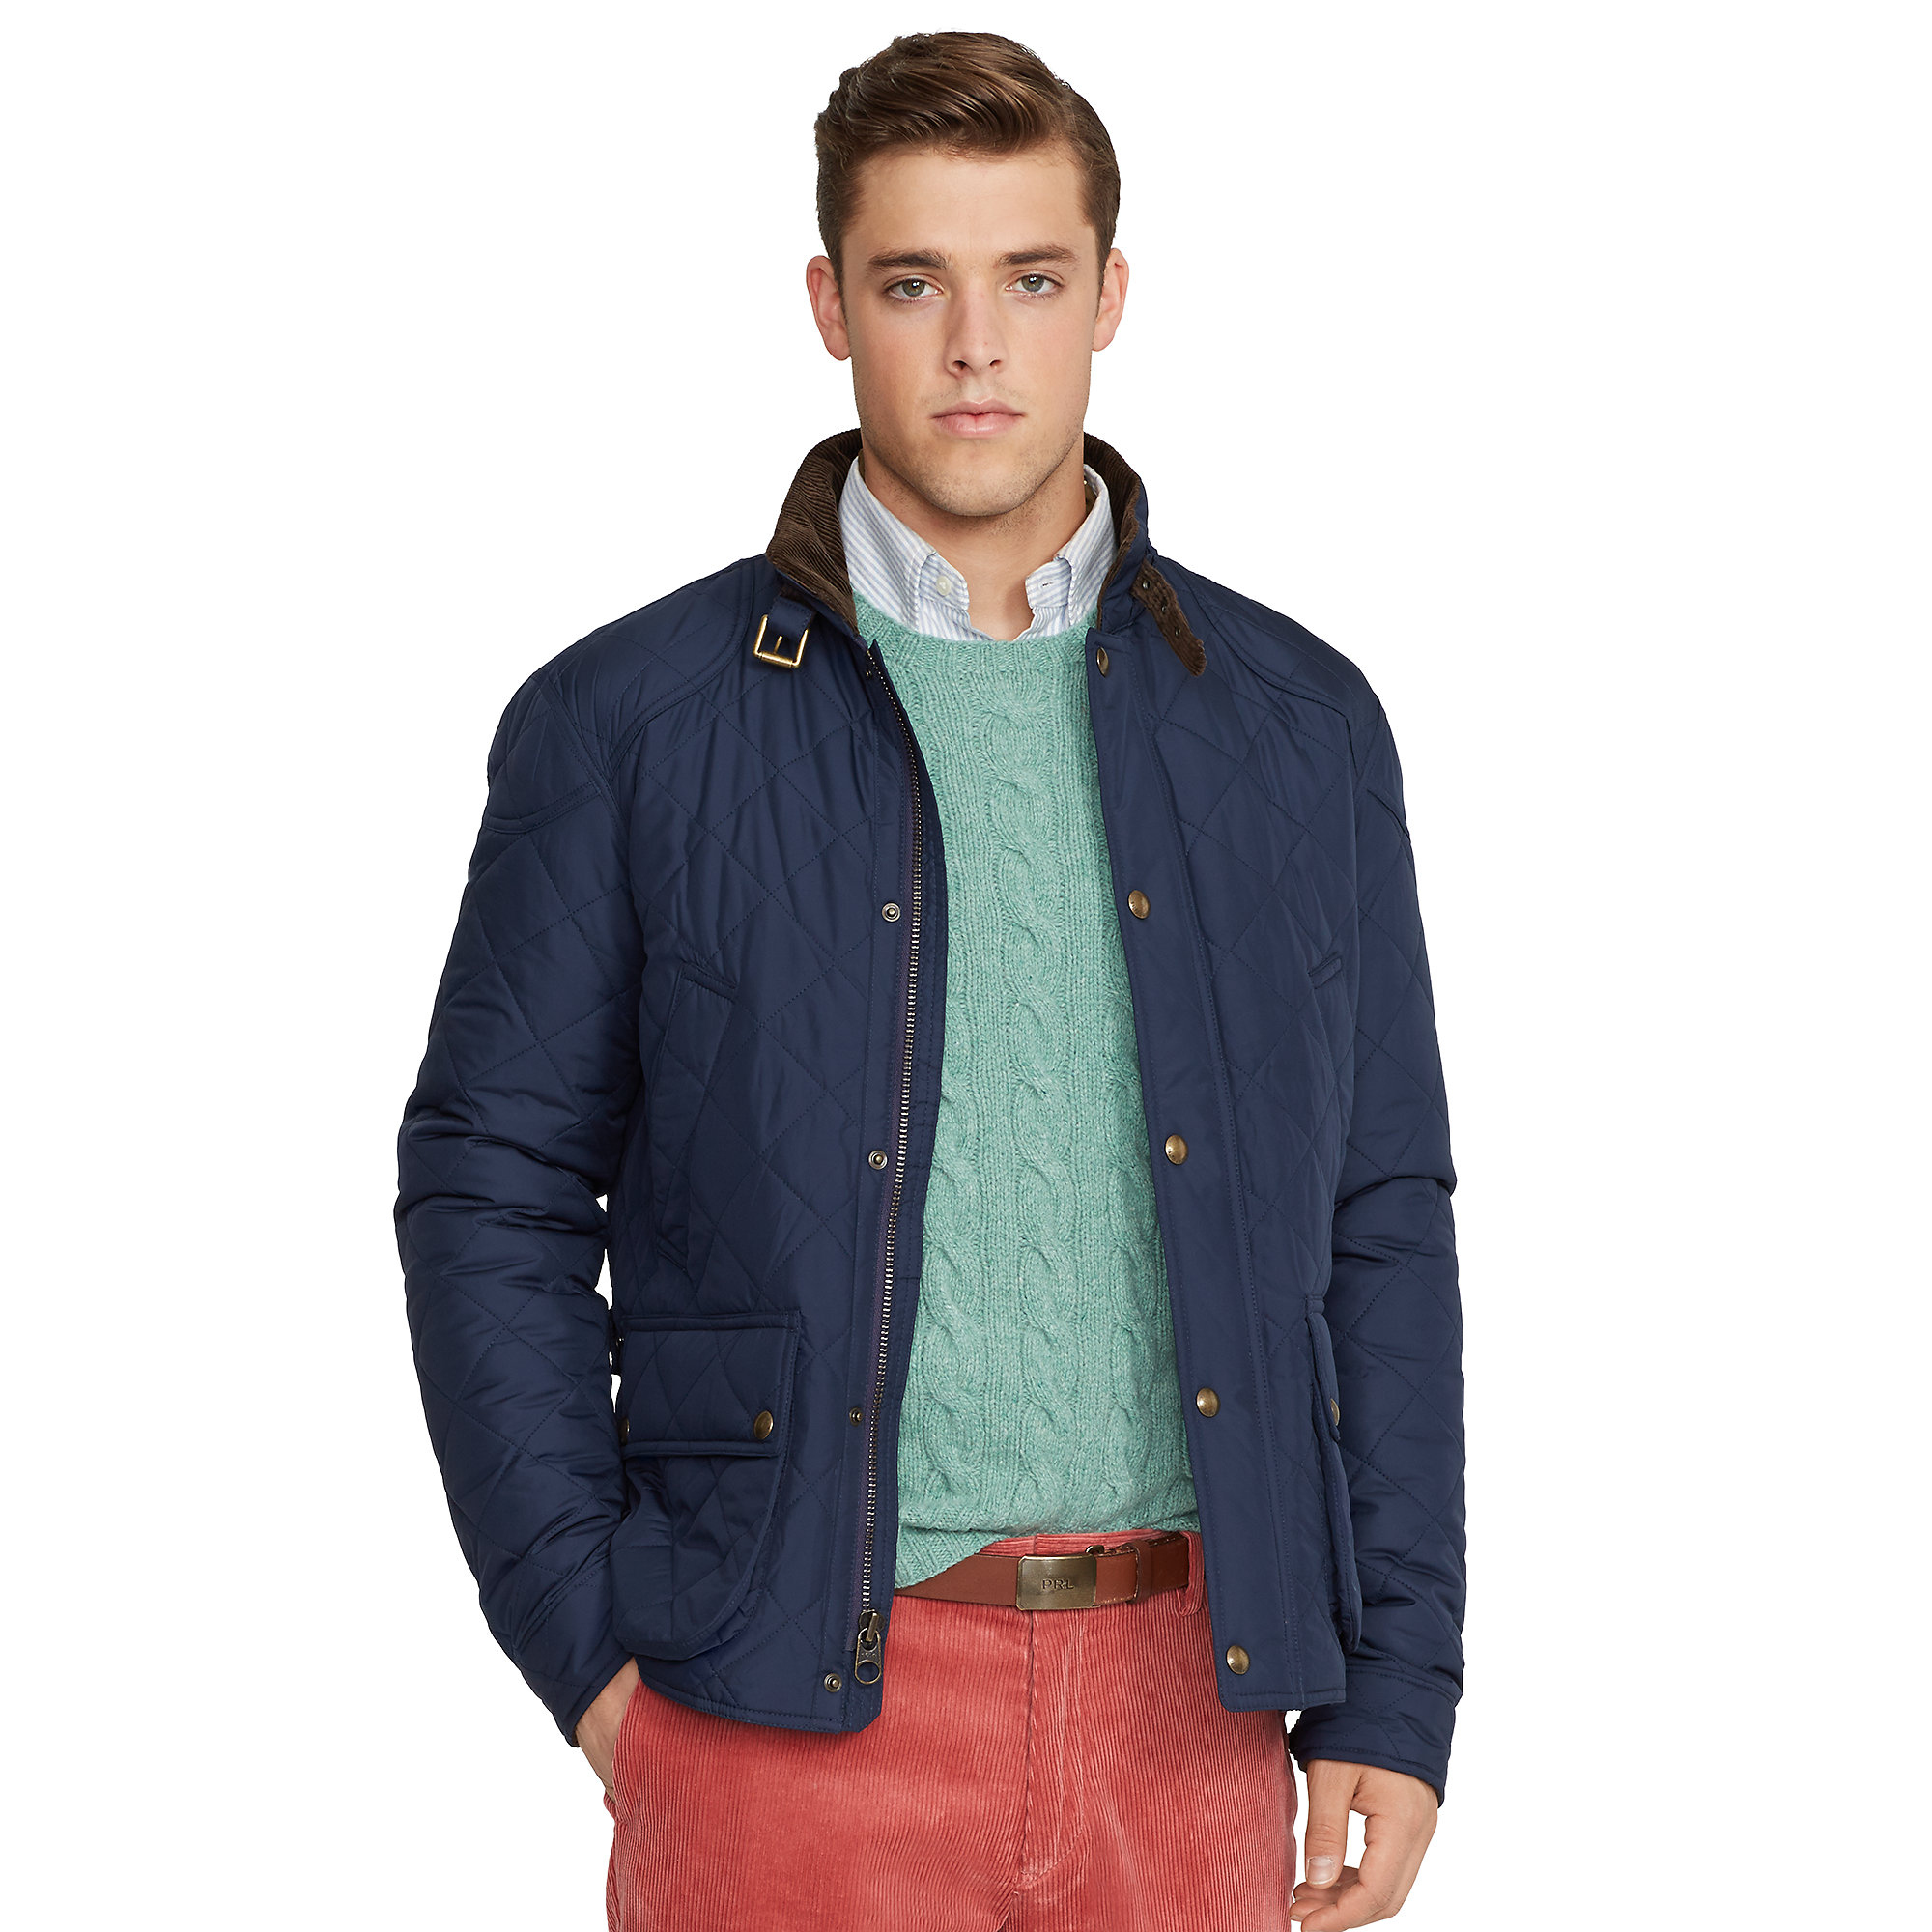 Ralph Lauren Cadwell Quilted Jacket Sale - www.amorgion-hotel.gr 1696138746